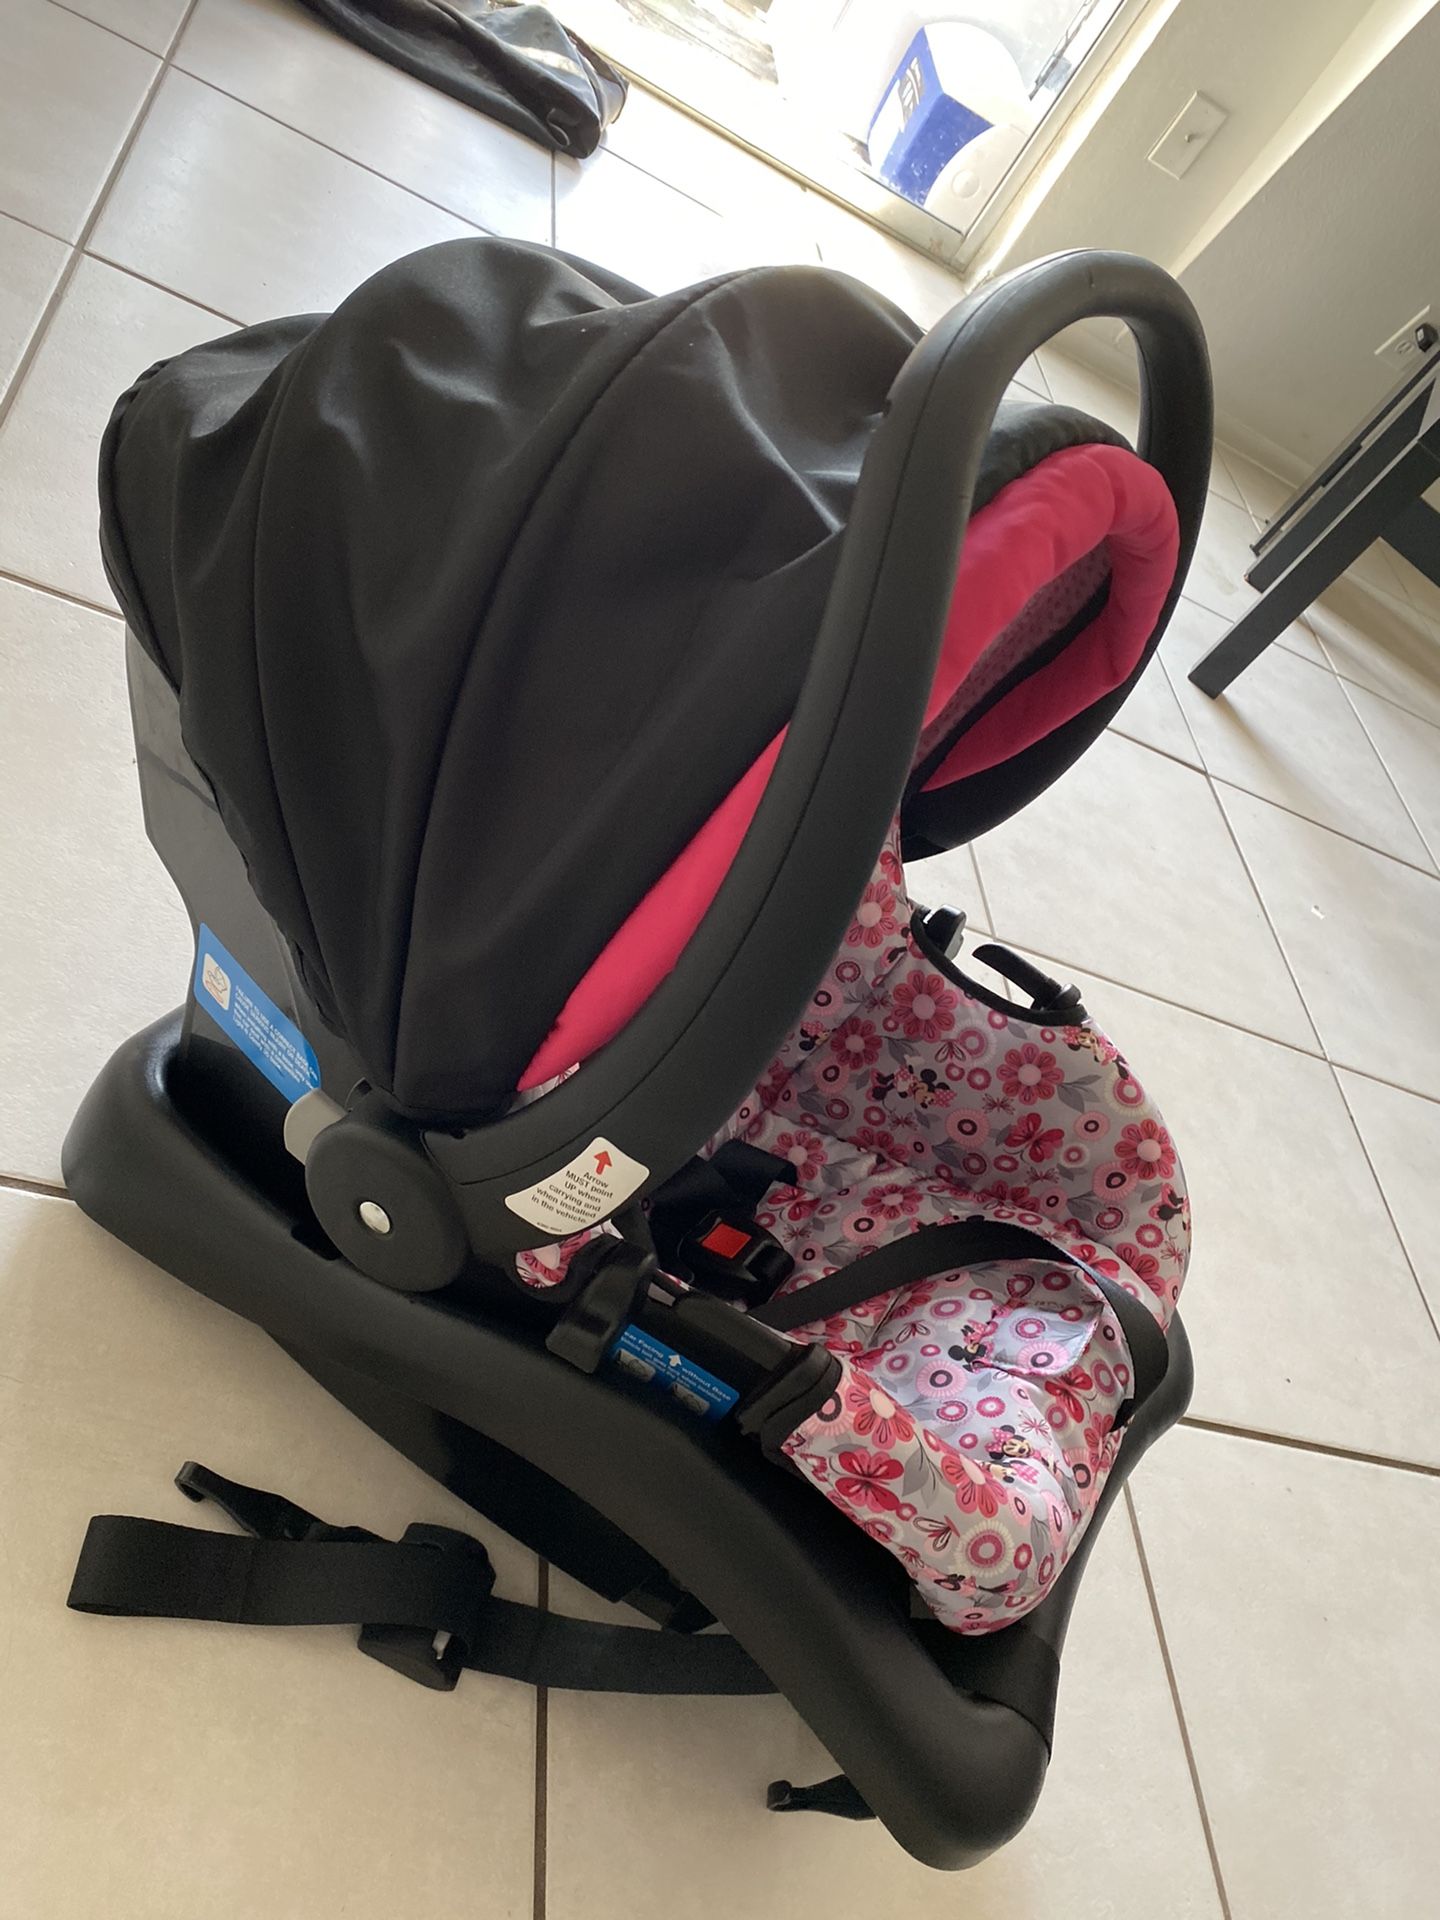 Graco Minnie Mouse stroller & car seat set